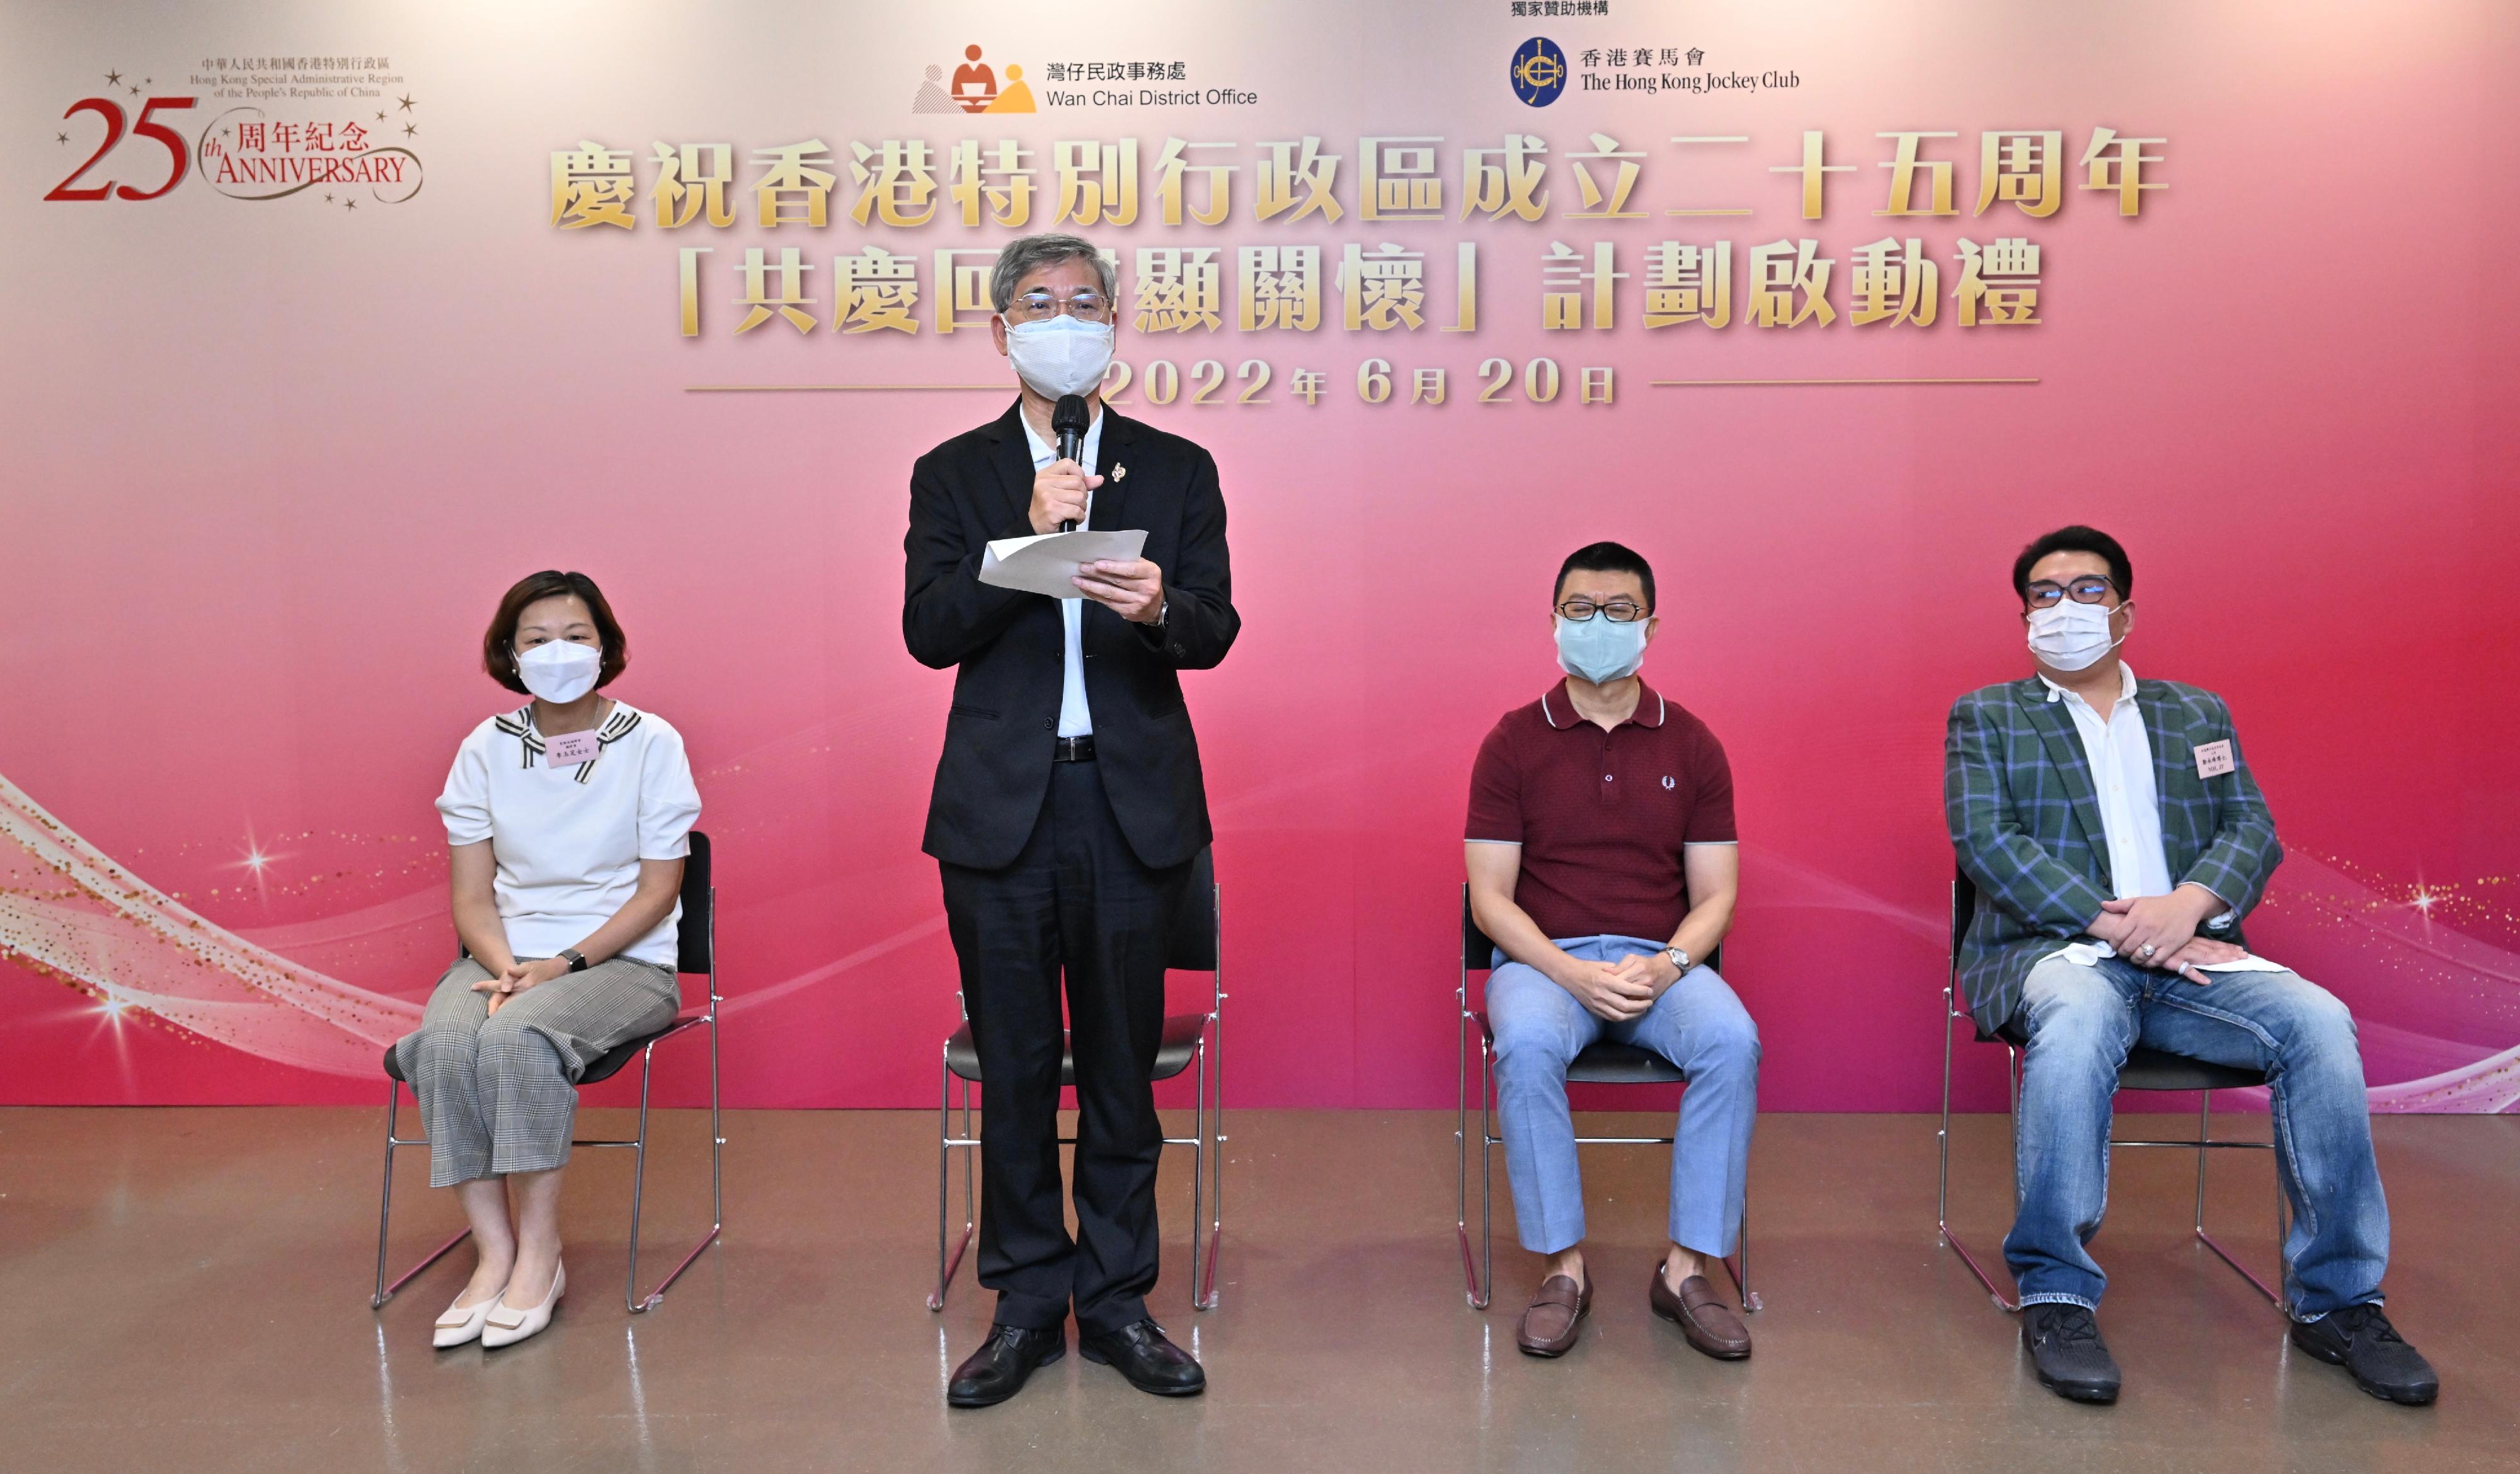 The Secretary for Labour and Welfare, Dr Law Chi-kwong, today (June 20) visited Wan Chai District and Islands District, and distributed gift packs under the Celebrations for All project in celebration of the 25th anniversary of the establishment of the Hong Kong Special Administrative Region, extending warm regards to the disadvantaged and the underprivileged. Photo shows Dr Law (second left) officiating and speaking at the launch ceremony in Wan Chai District. Other guests are the Chief Executive Officer of St James' Settlement, Ms Josephine Lee (first left); the District Officer (Wan Chai), Mr Rick Chan (second right); and the Chairman of the Hong Kong Wan Chai District Association, Dr Baldwin Cheng (first right).